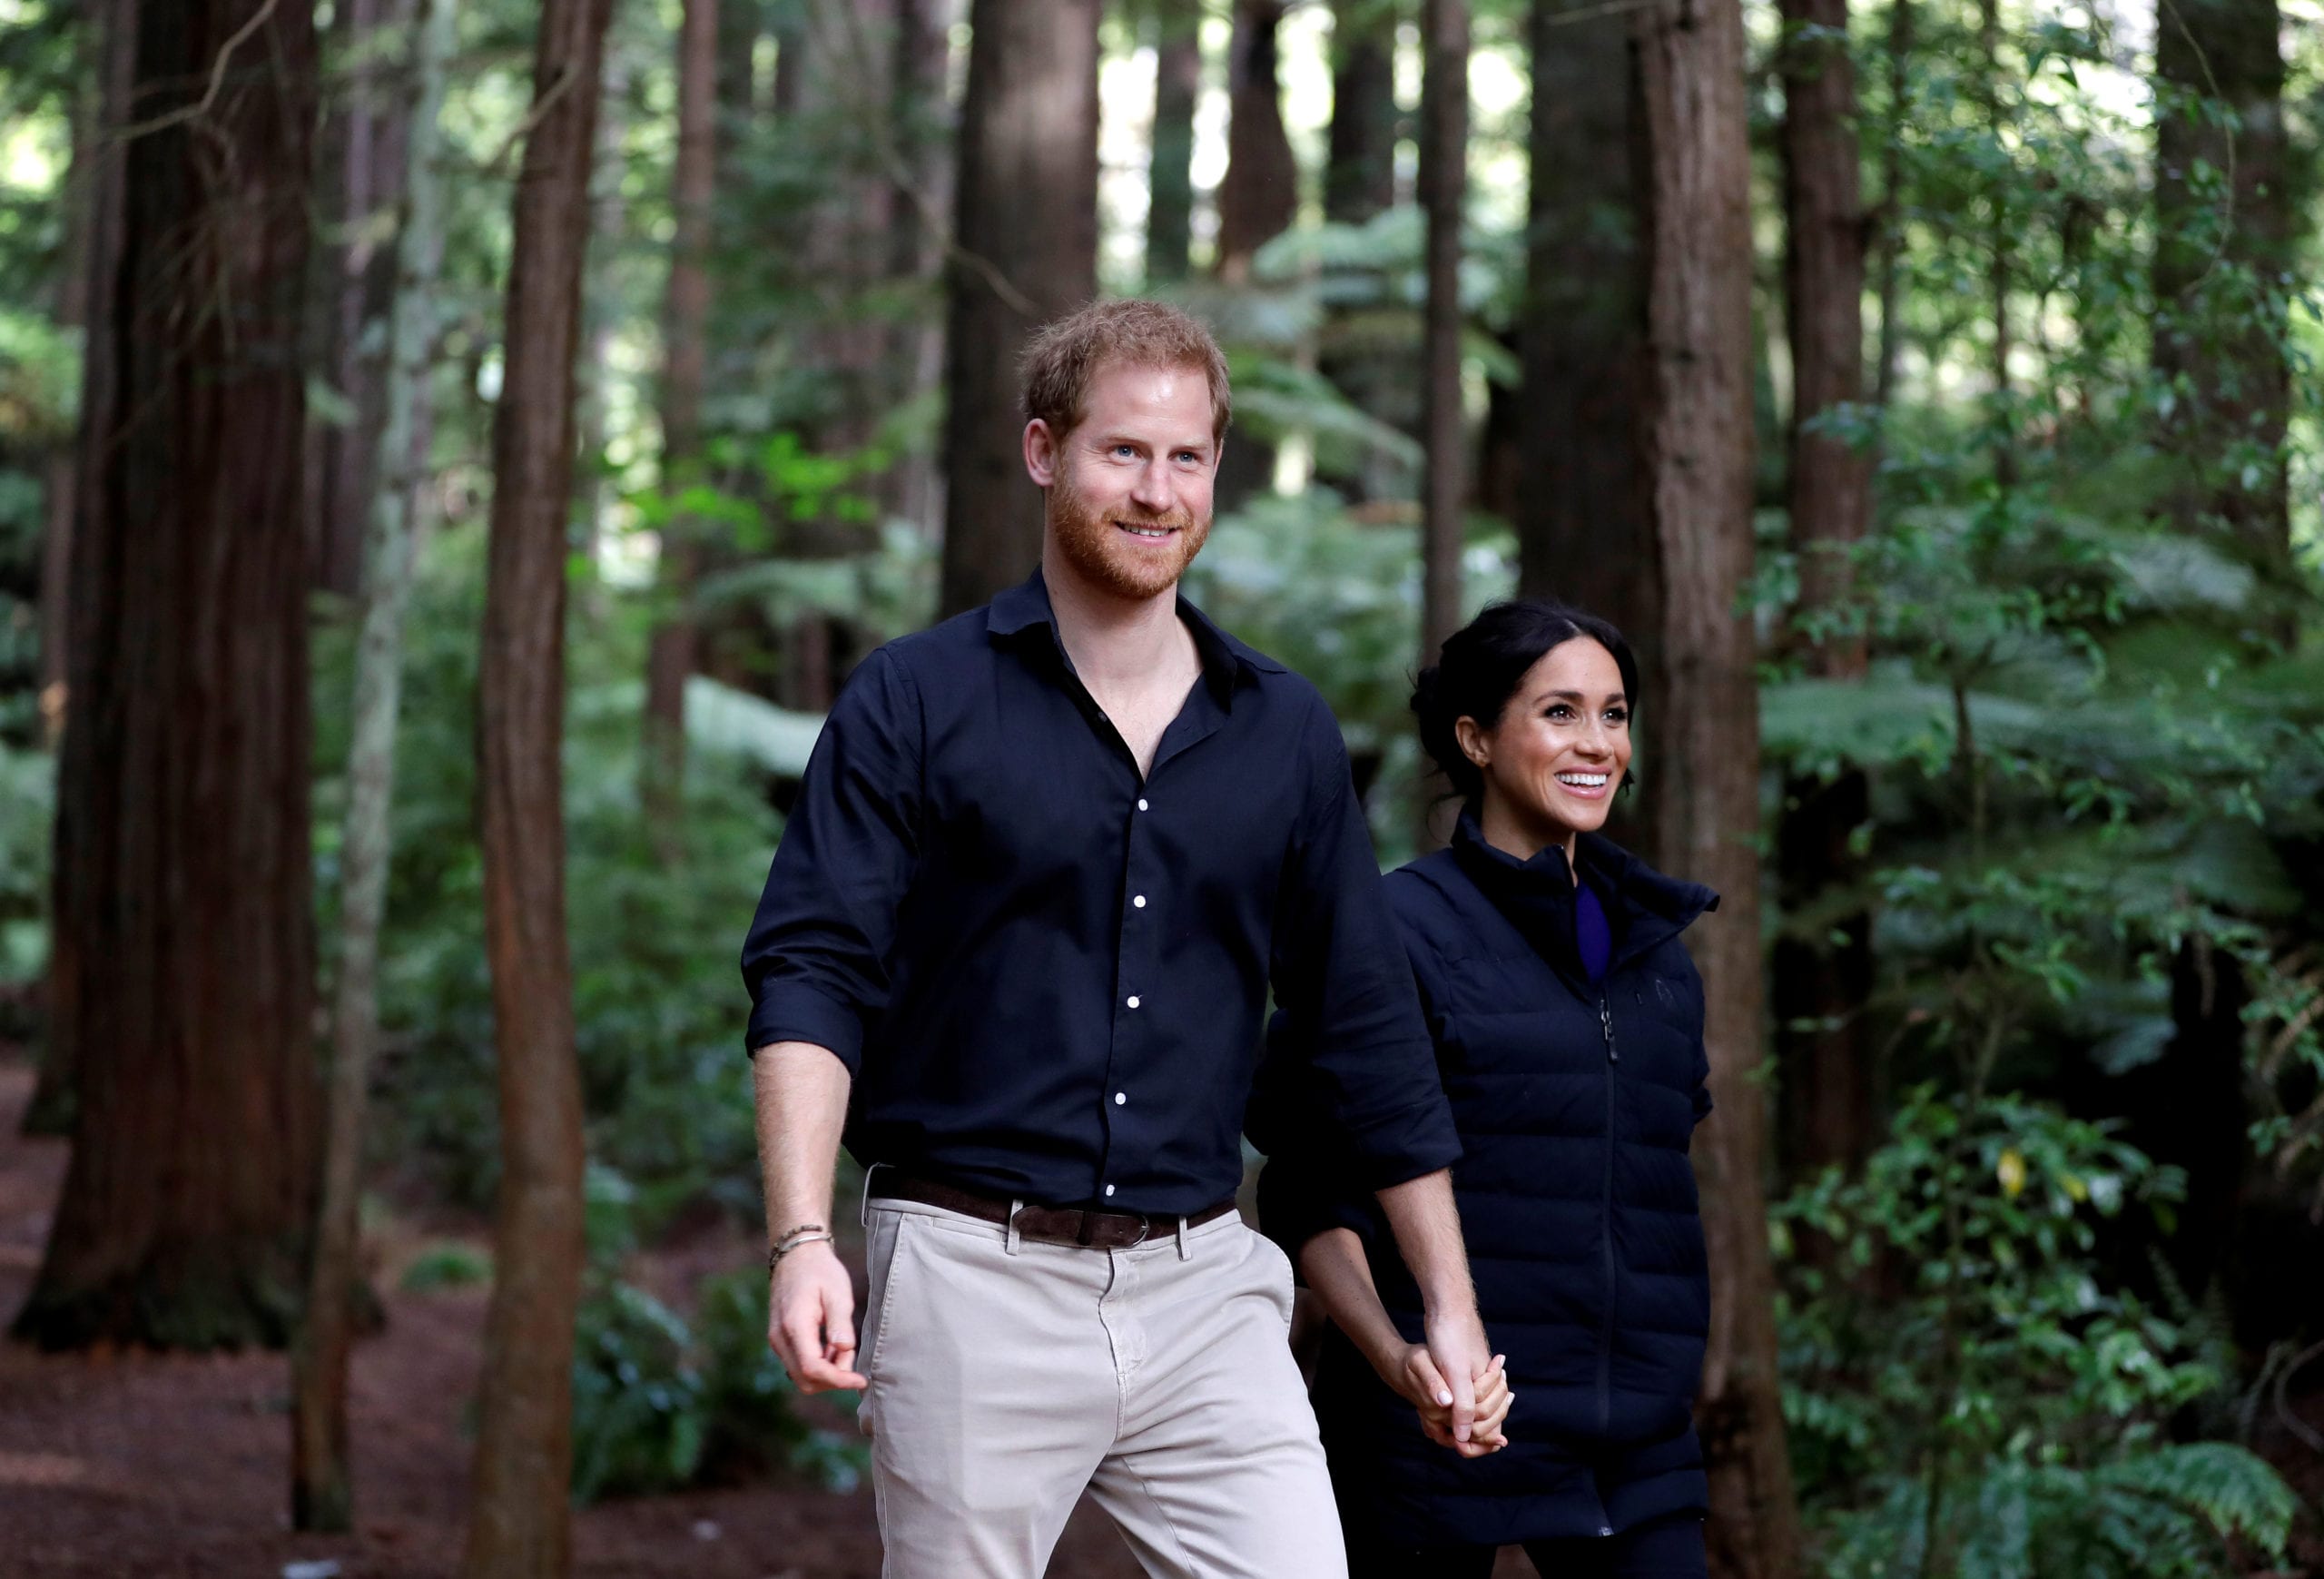 Fans plant trees in honour of the Sussexes, creating ‘Archie’s Woods’